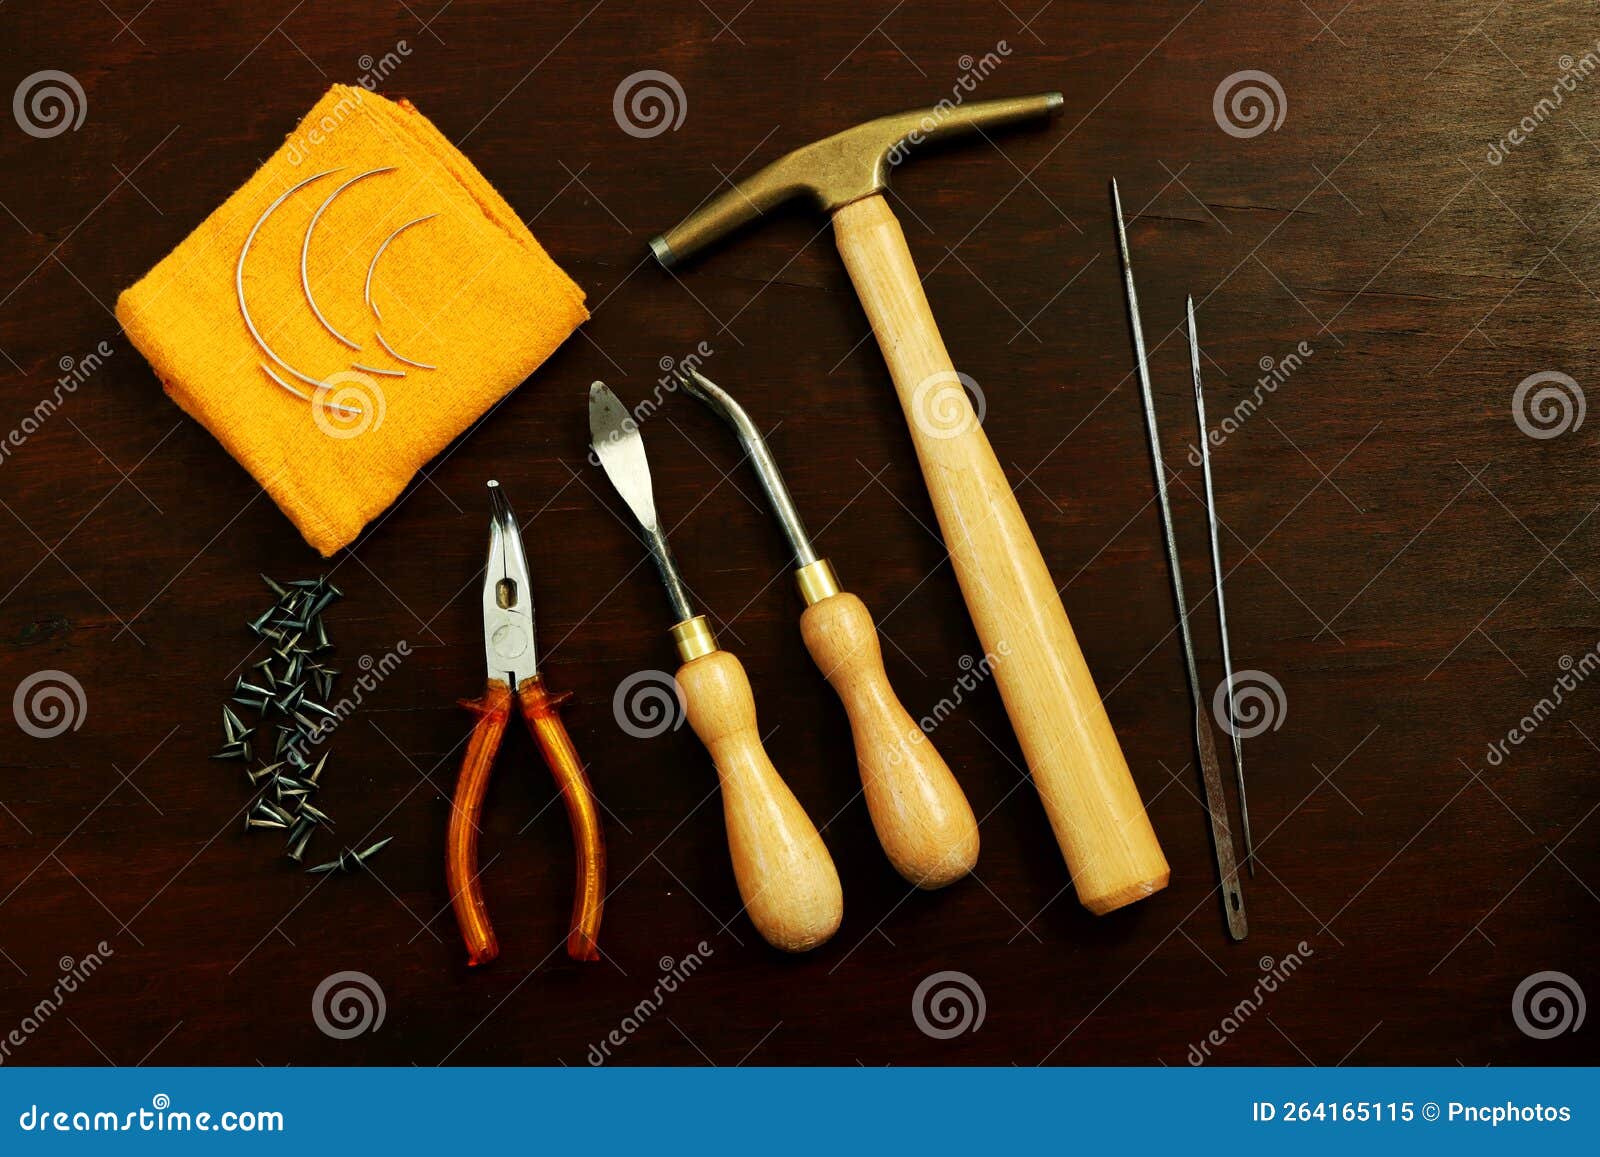 A Selection of Upholstery Tools. Stock Image - Image of wood, background:  264165115